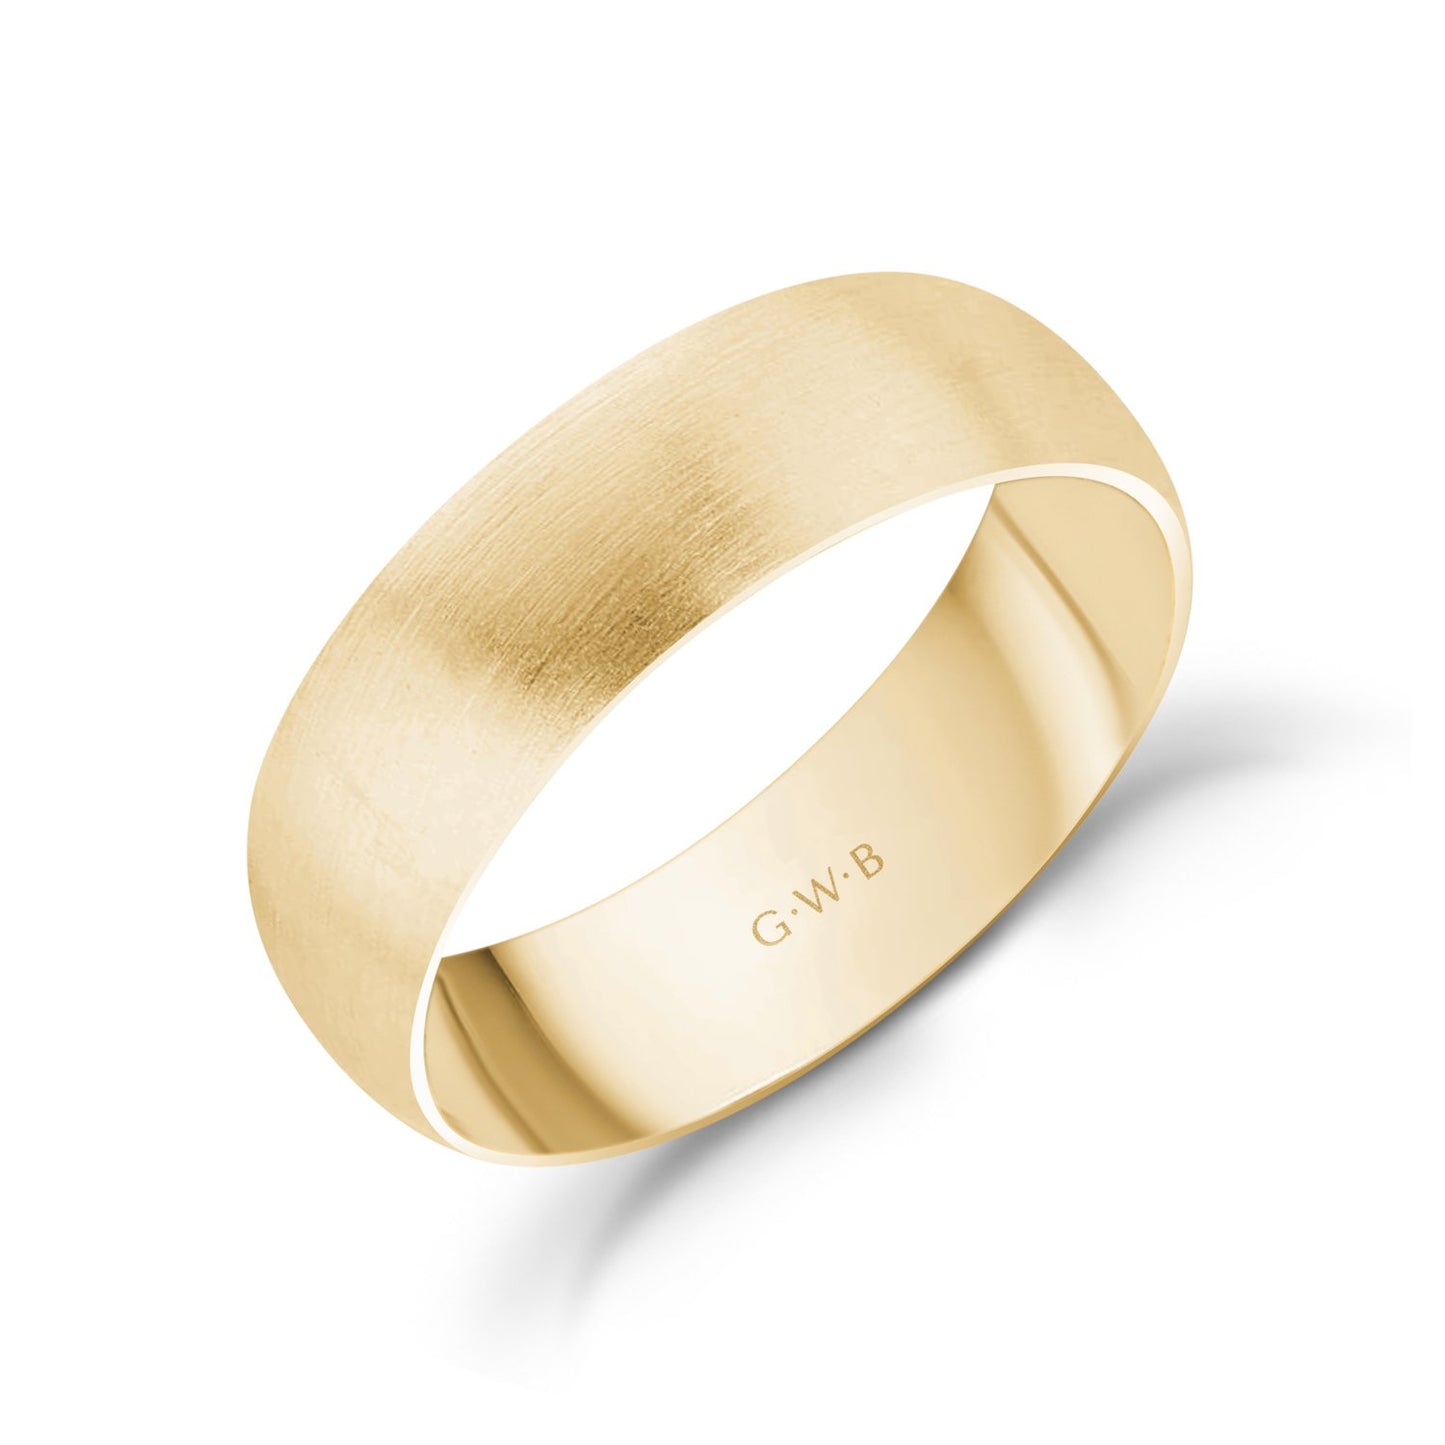 6mm 14K Gold Brushed Dome Wedding Band - G.W Bands